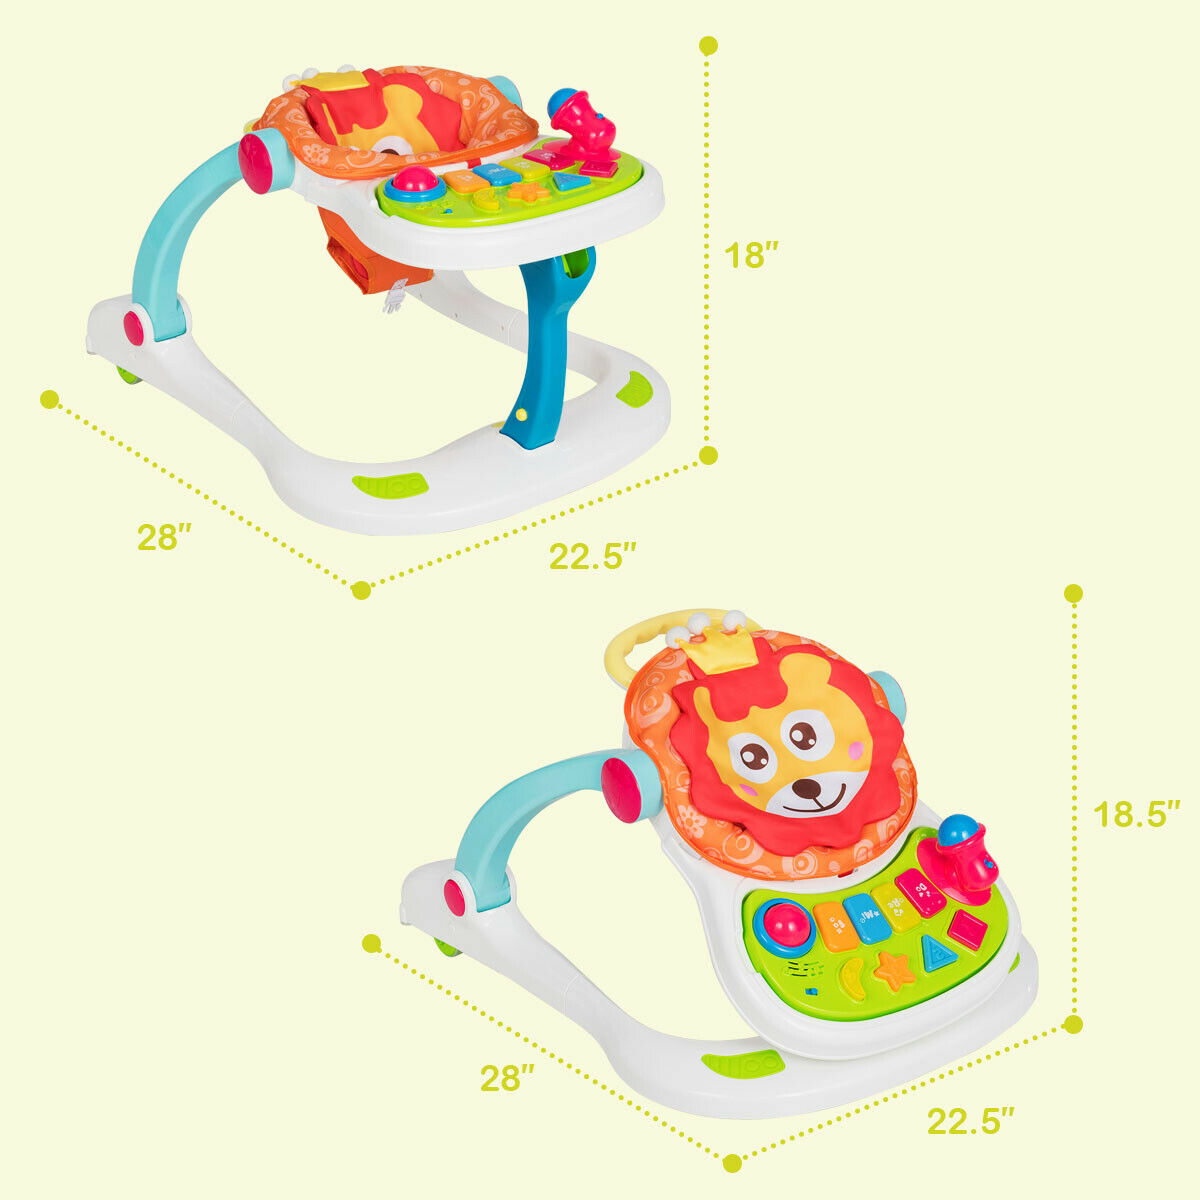 kmart 6 in 1 activity cube and walker